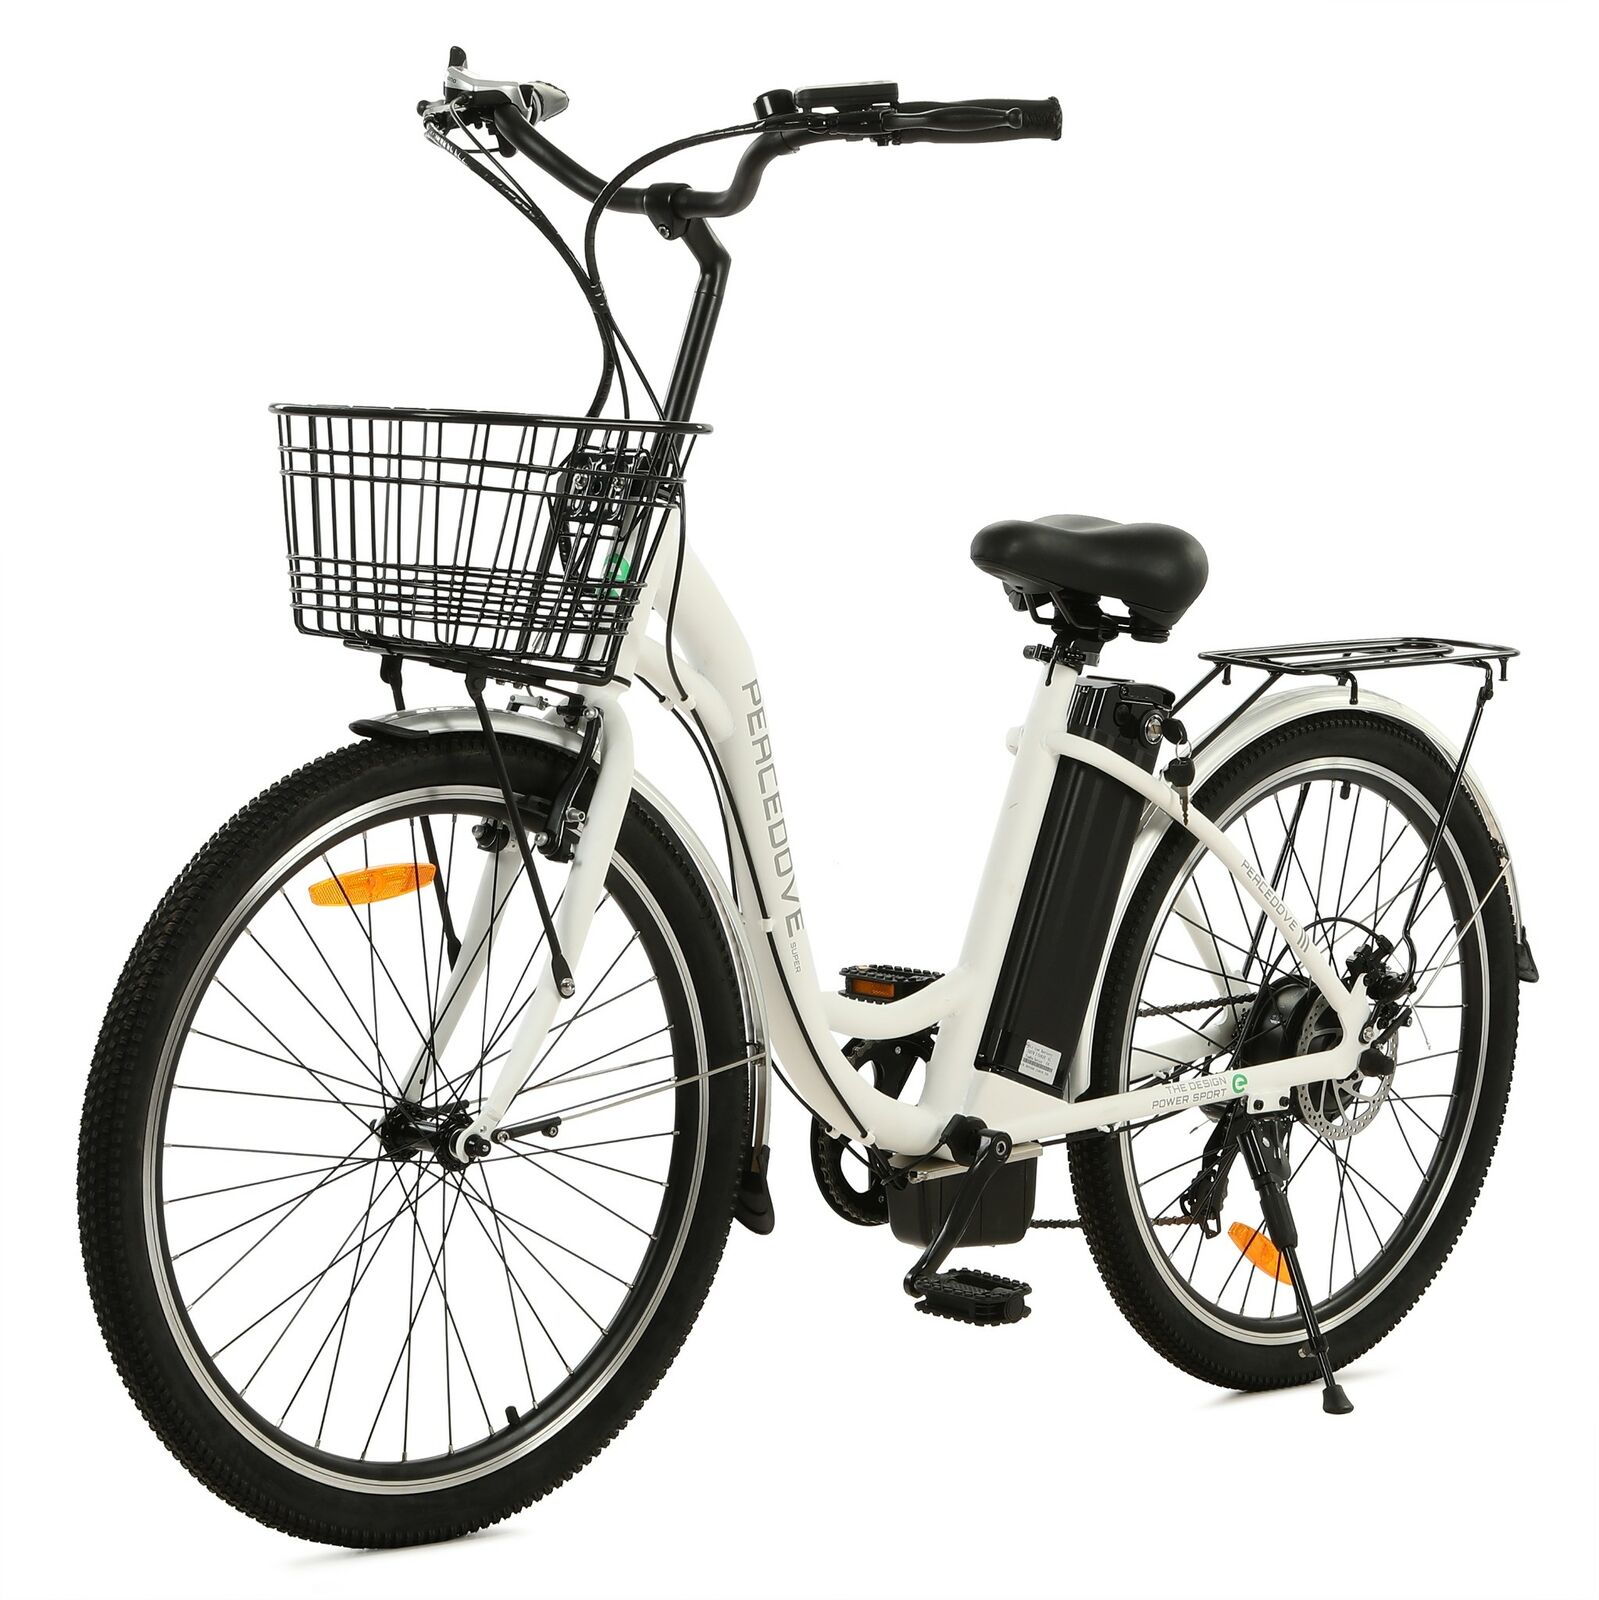 Ecotric, Ecotric Peacedove E-Bike 36V 10AH 350W 15-18 MPH 26" City Bike with Basket and Rear Rack Matte Black New